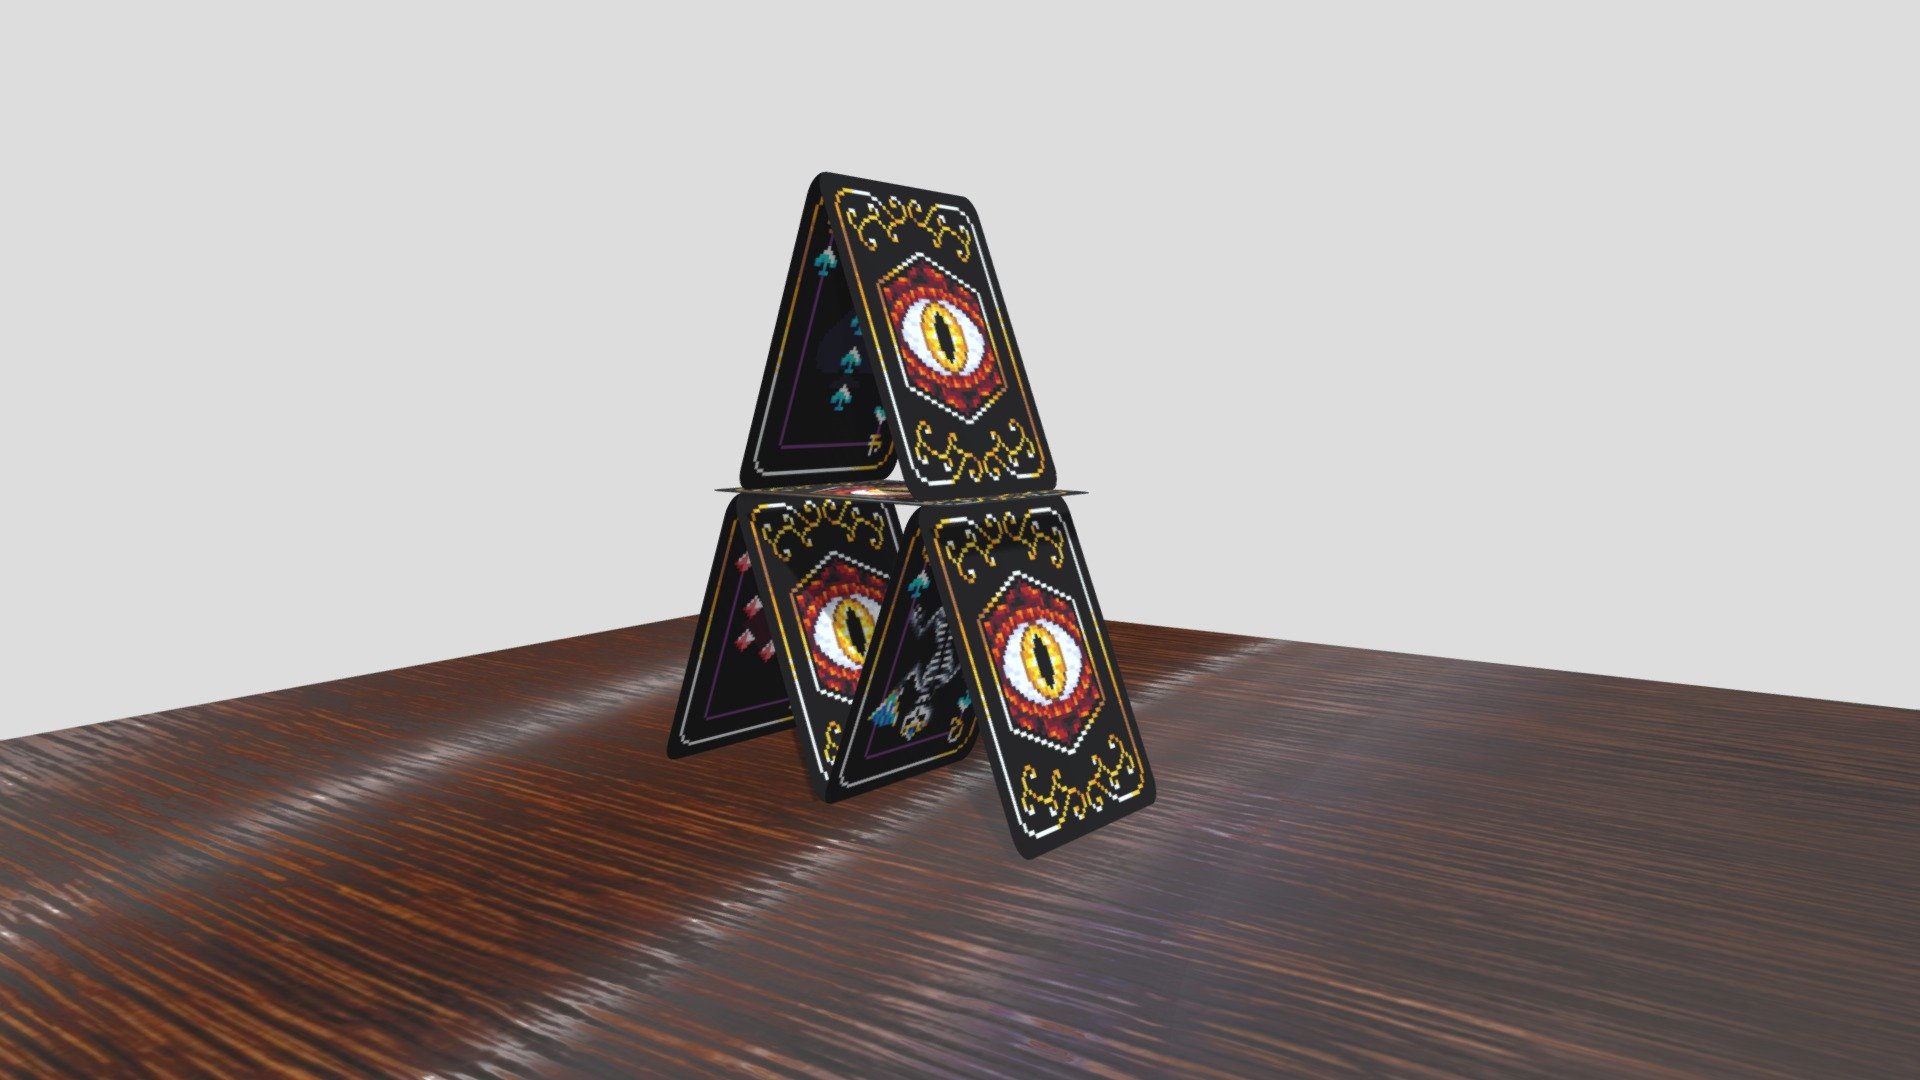 Baron Playing Cards 3d Model By Realastropulse [b2b5d90] Sketchfab